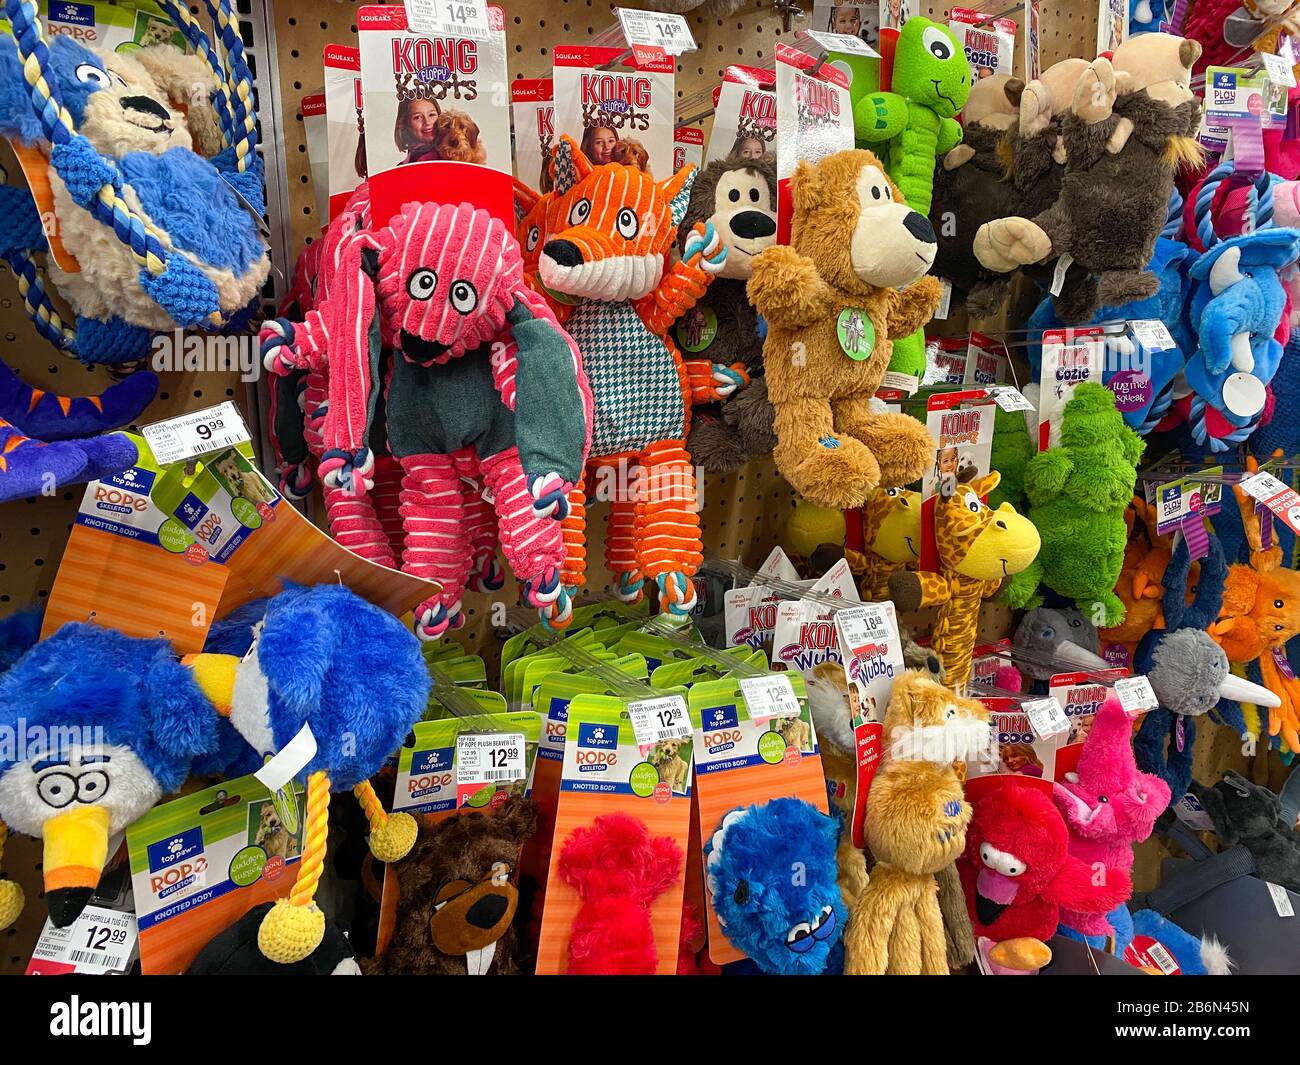 Orlando, FL/USA-1/29/20: A display of colorful Kong Knots dog toys for sale at a Petsmart Superstore ready for pet owners to purchase for their pets. Stock Photo